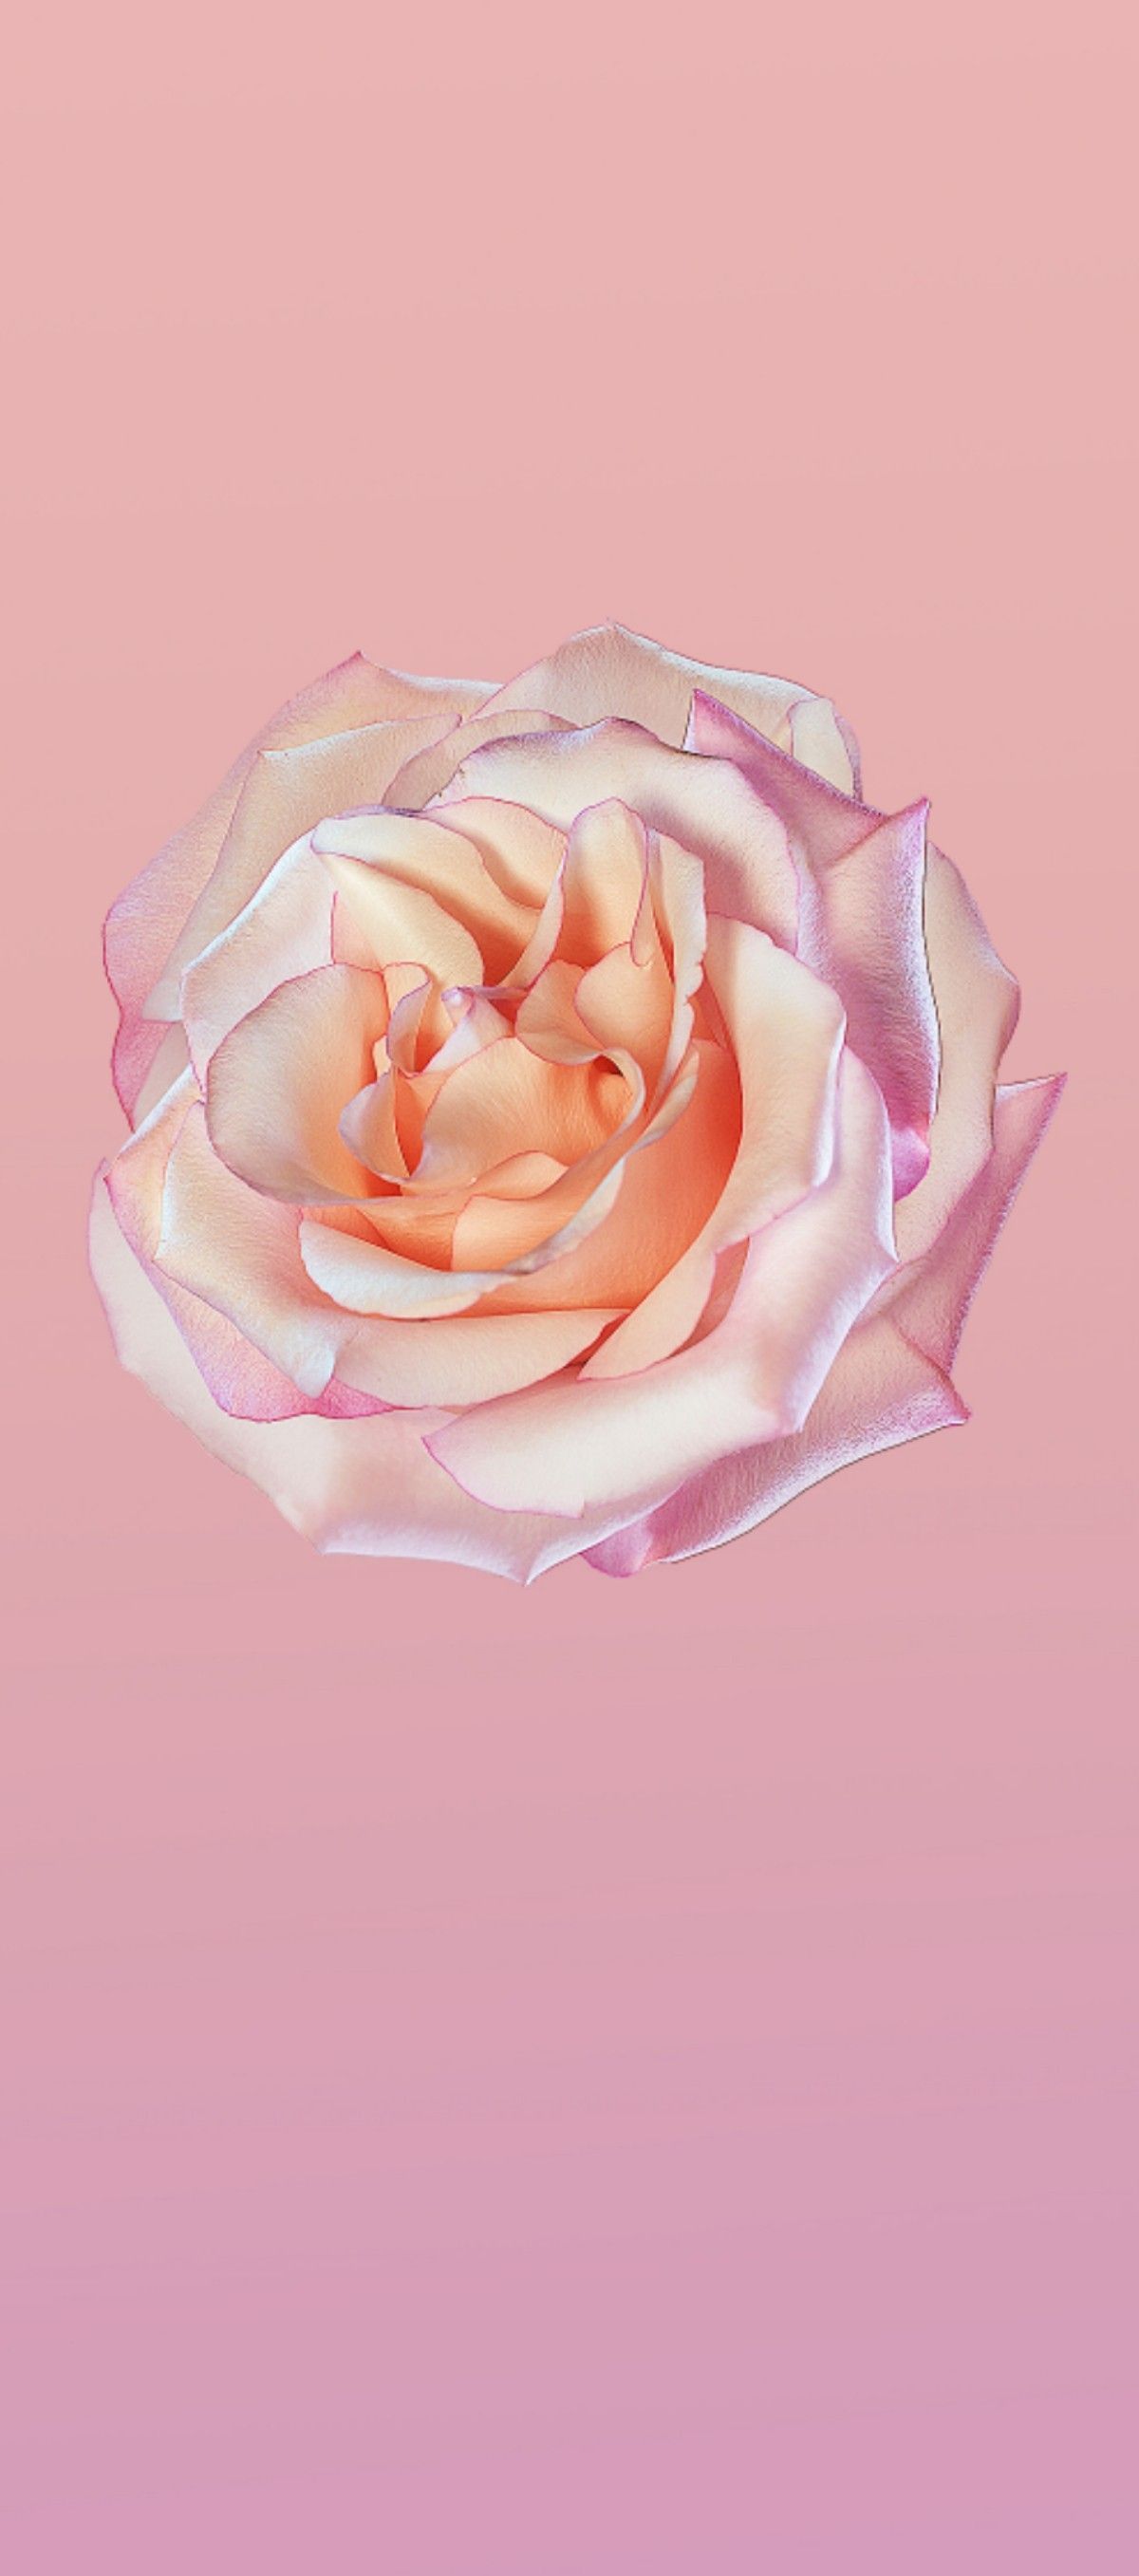 iOS 11, iPhone X, rose, pink, clean, simple, abstract, apple, wallpaper, iphone 8, clean, beauty, c…